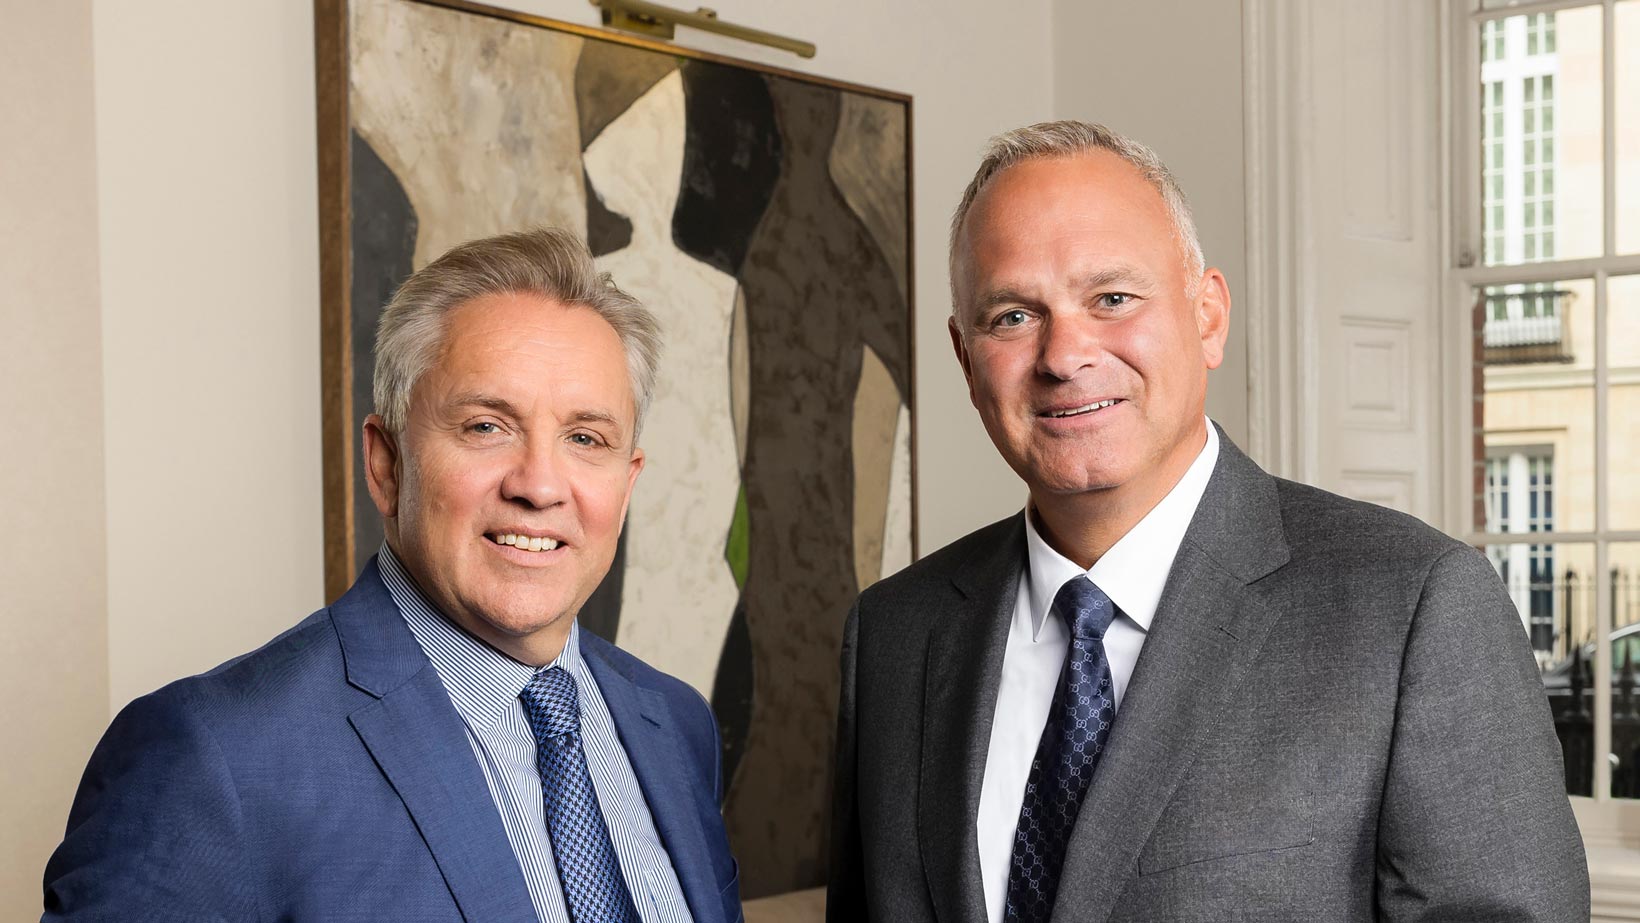 Dexters appoints Justin King CBE as its new Chairman